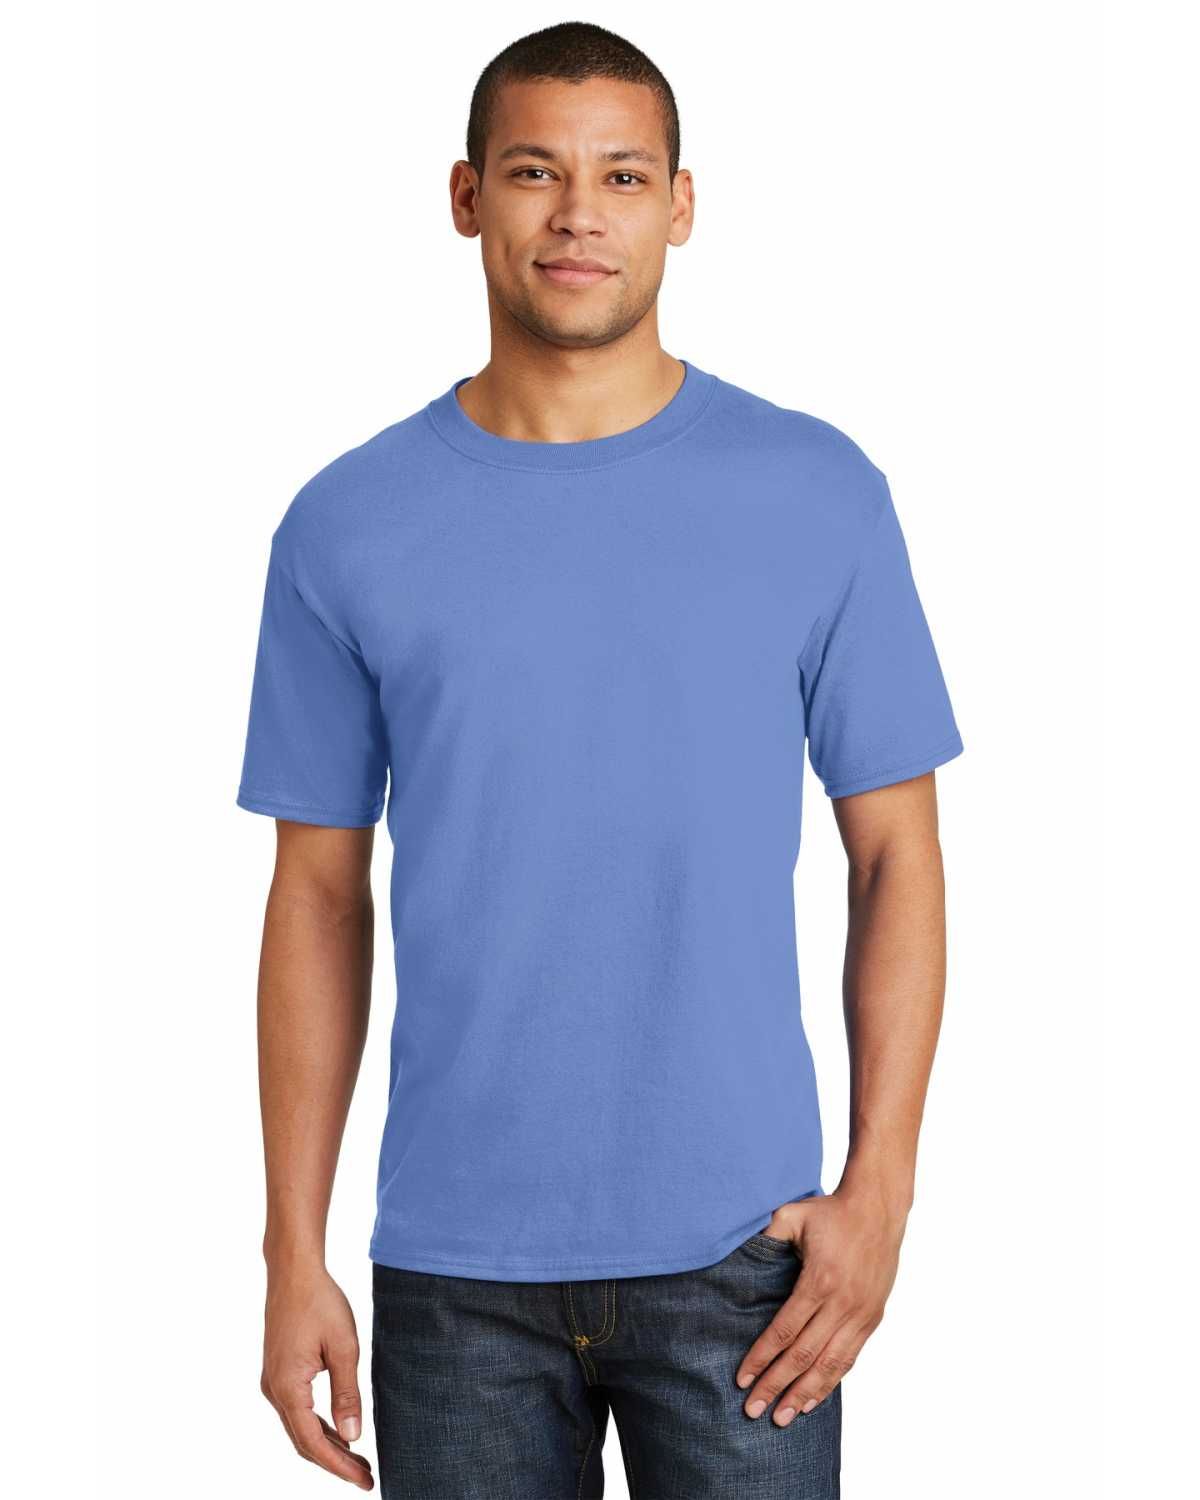 Hanes 5180 Beefy-T 100% Cotton T-Shirt on discount | ApparelChoice.com